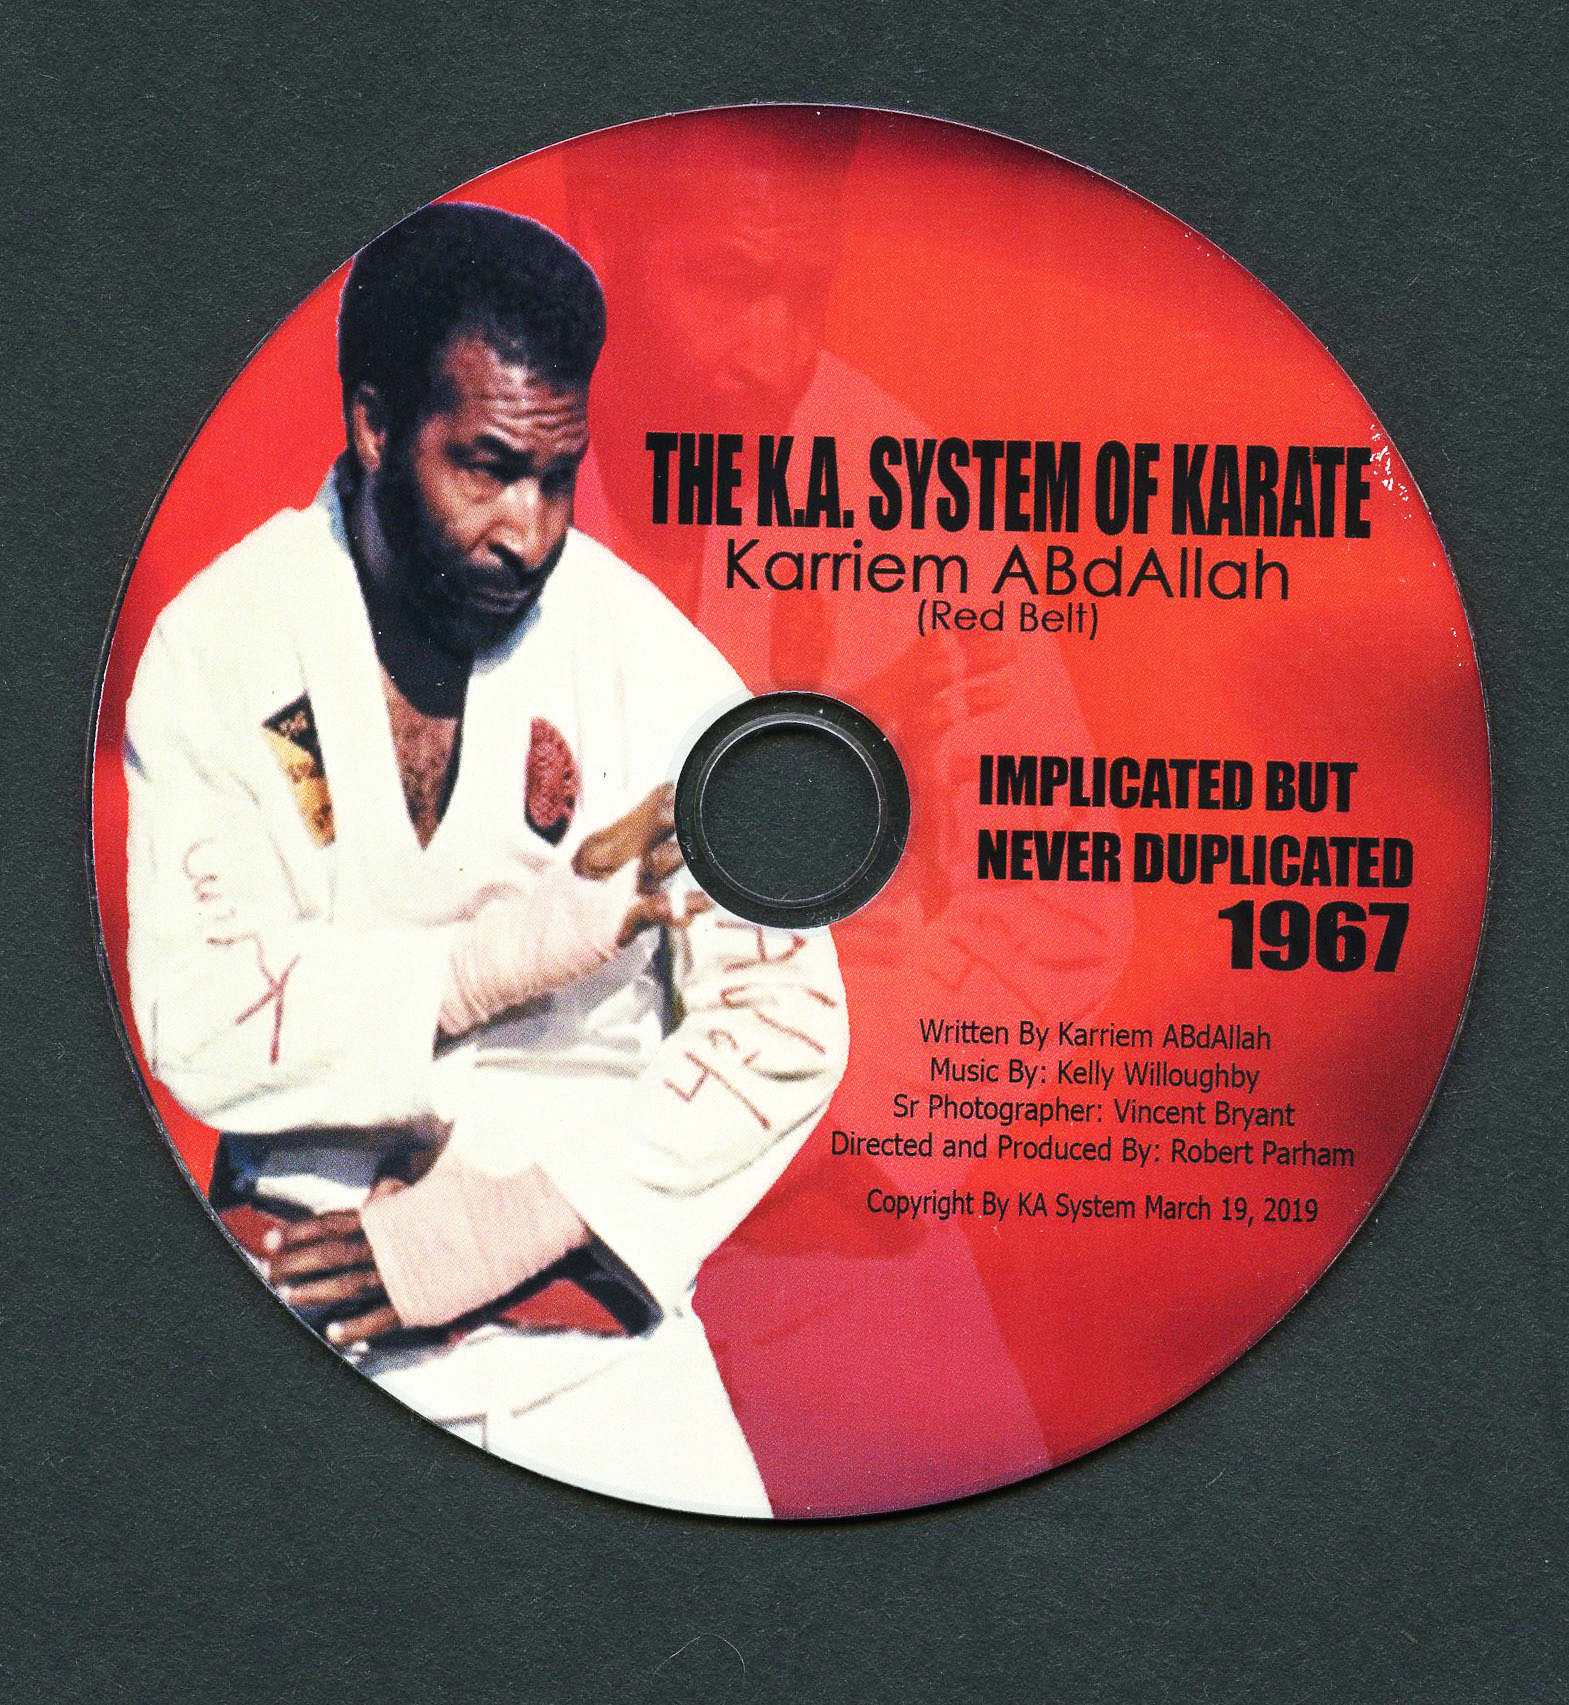 The K.A.System DVD on sale go to Buy Tickets & Books. DVD $13.99 USA postage In total $16.99.